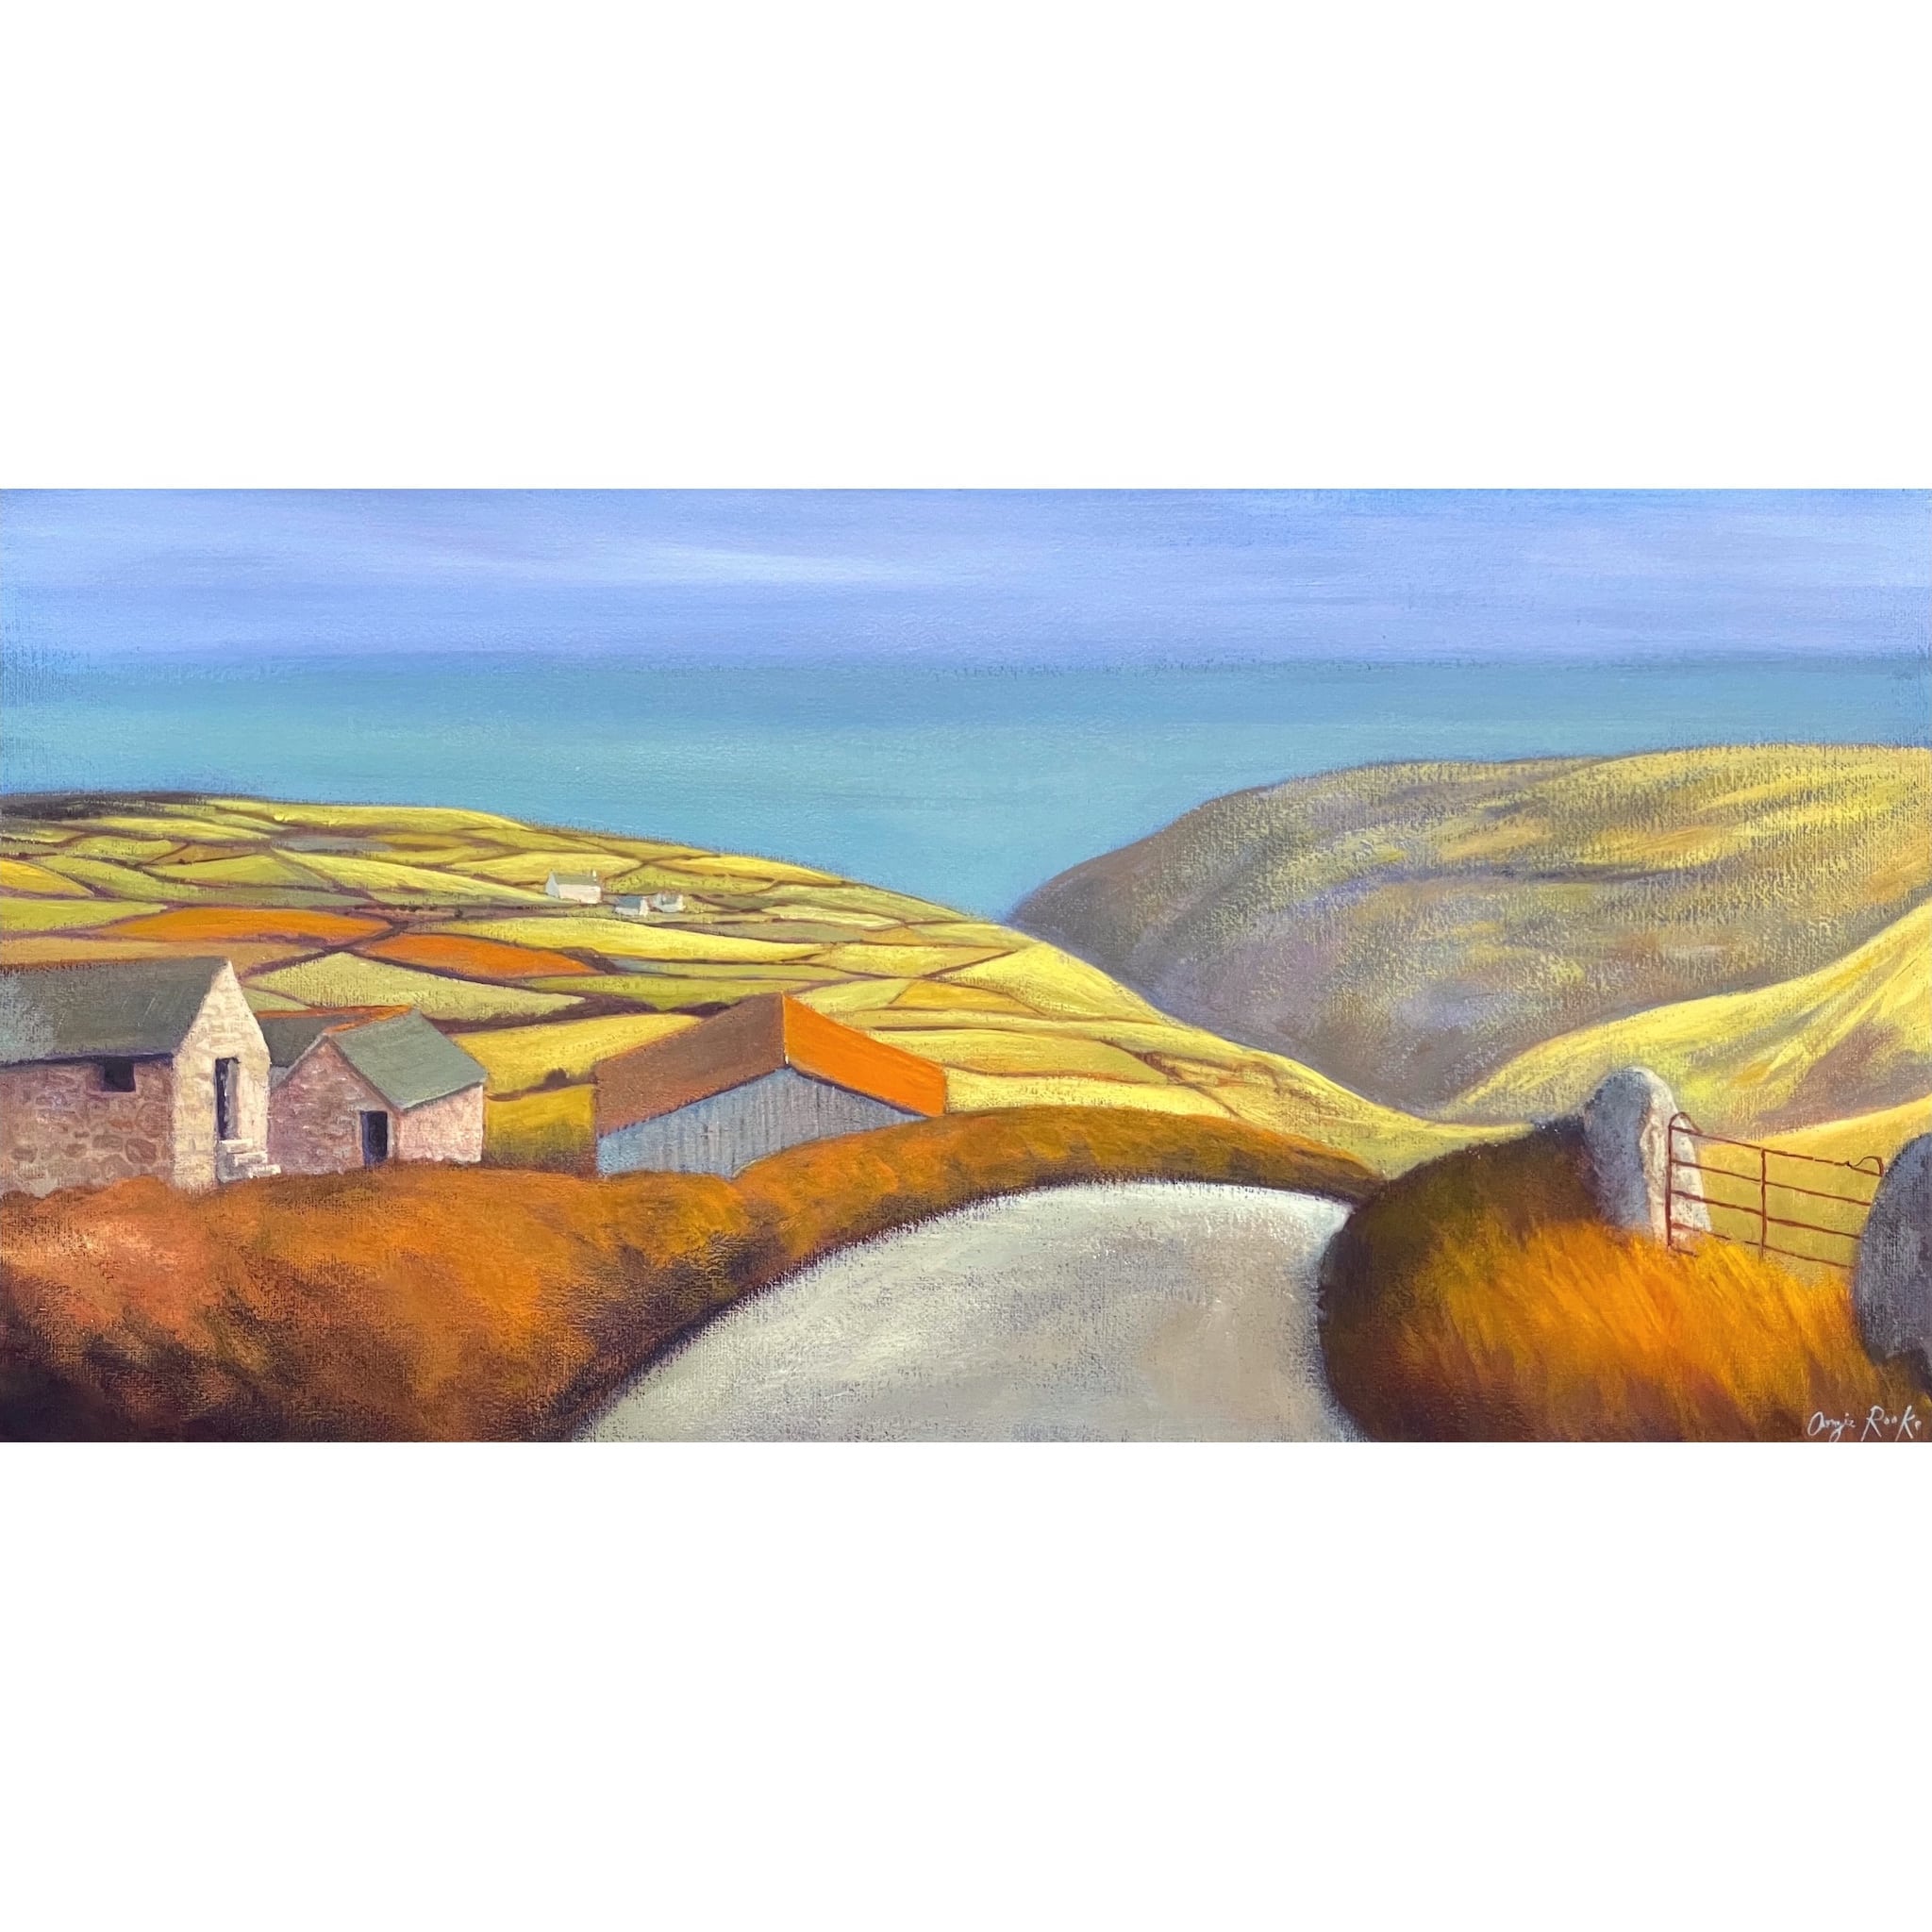 Painting of the seaward road at West Penwith, Cornwall by artist Angie Rooke